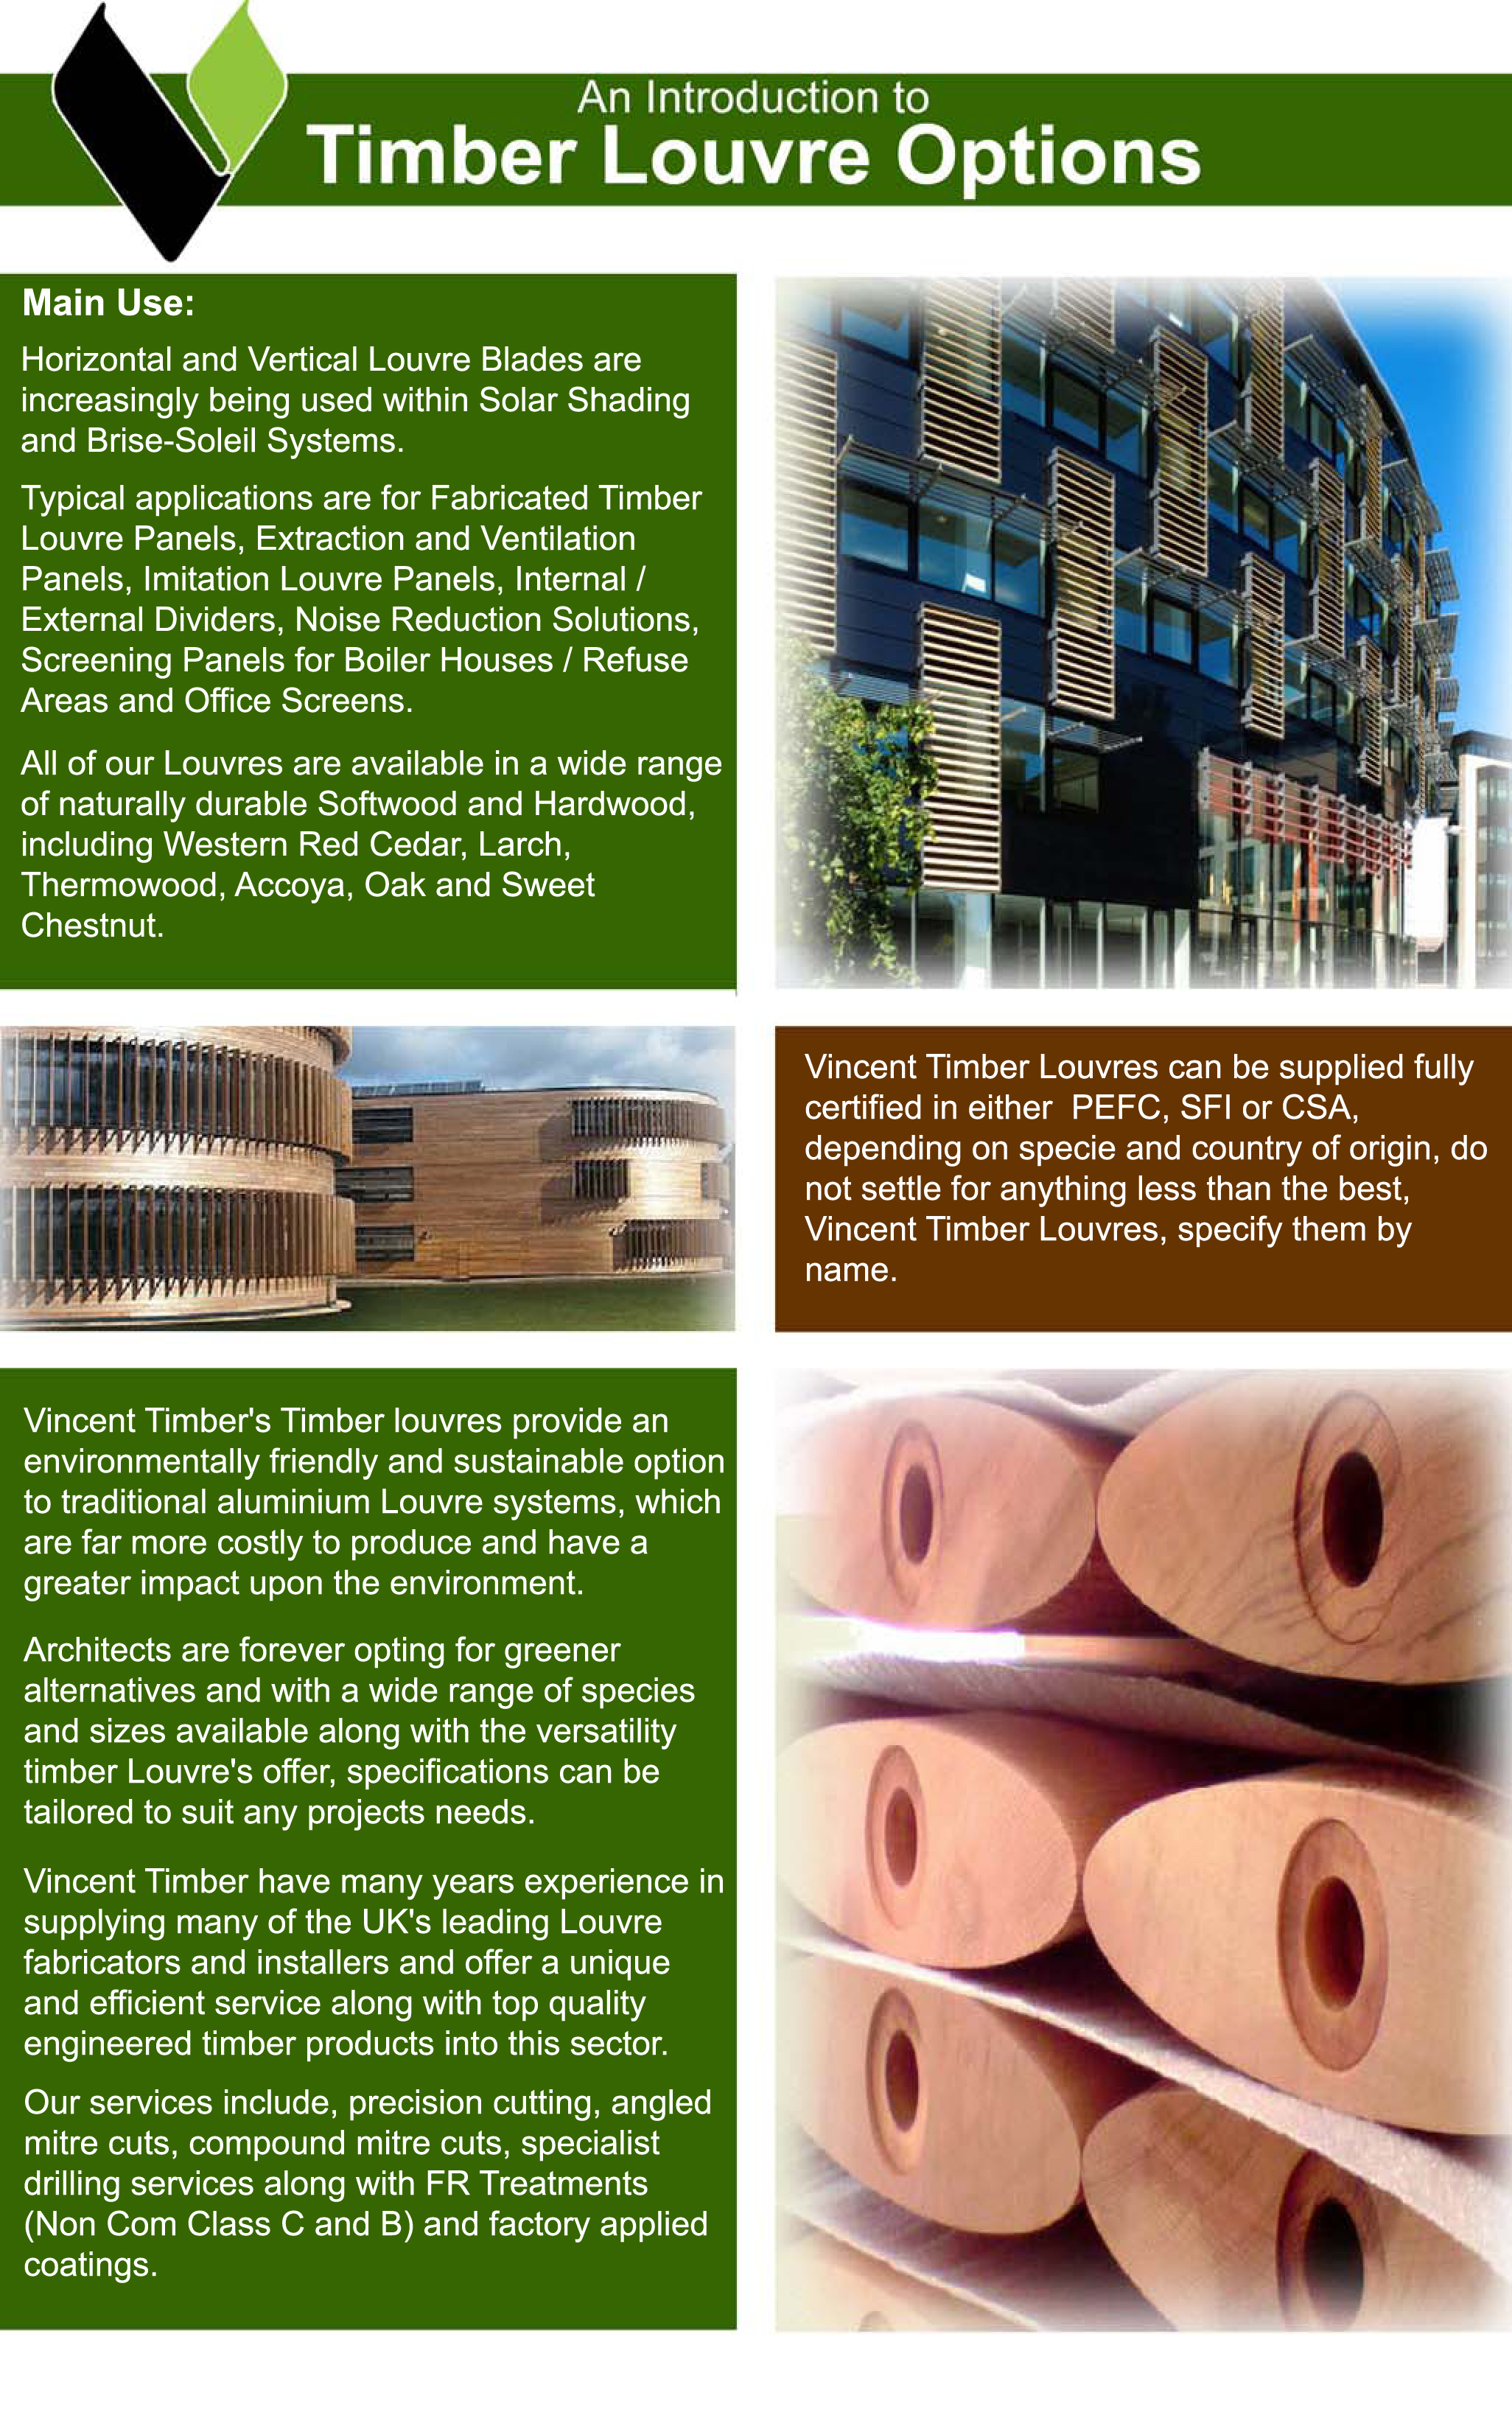 Overview of Timber Louvres